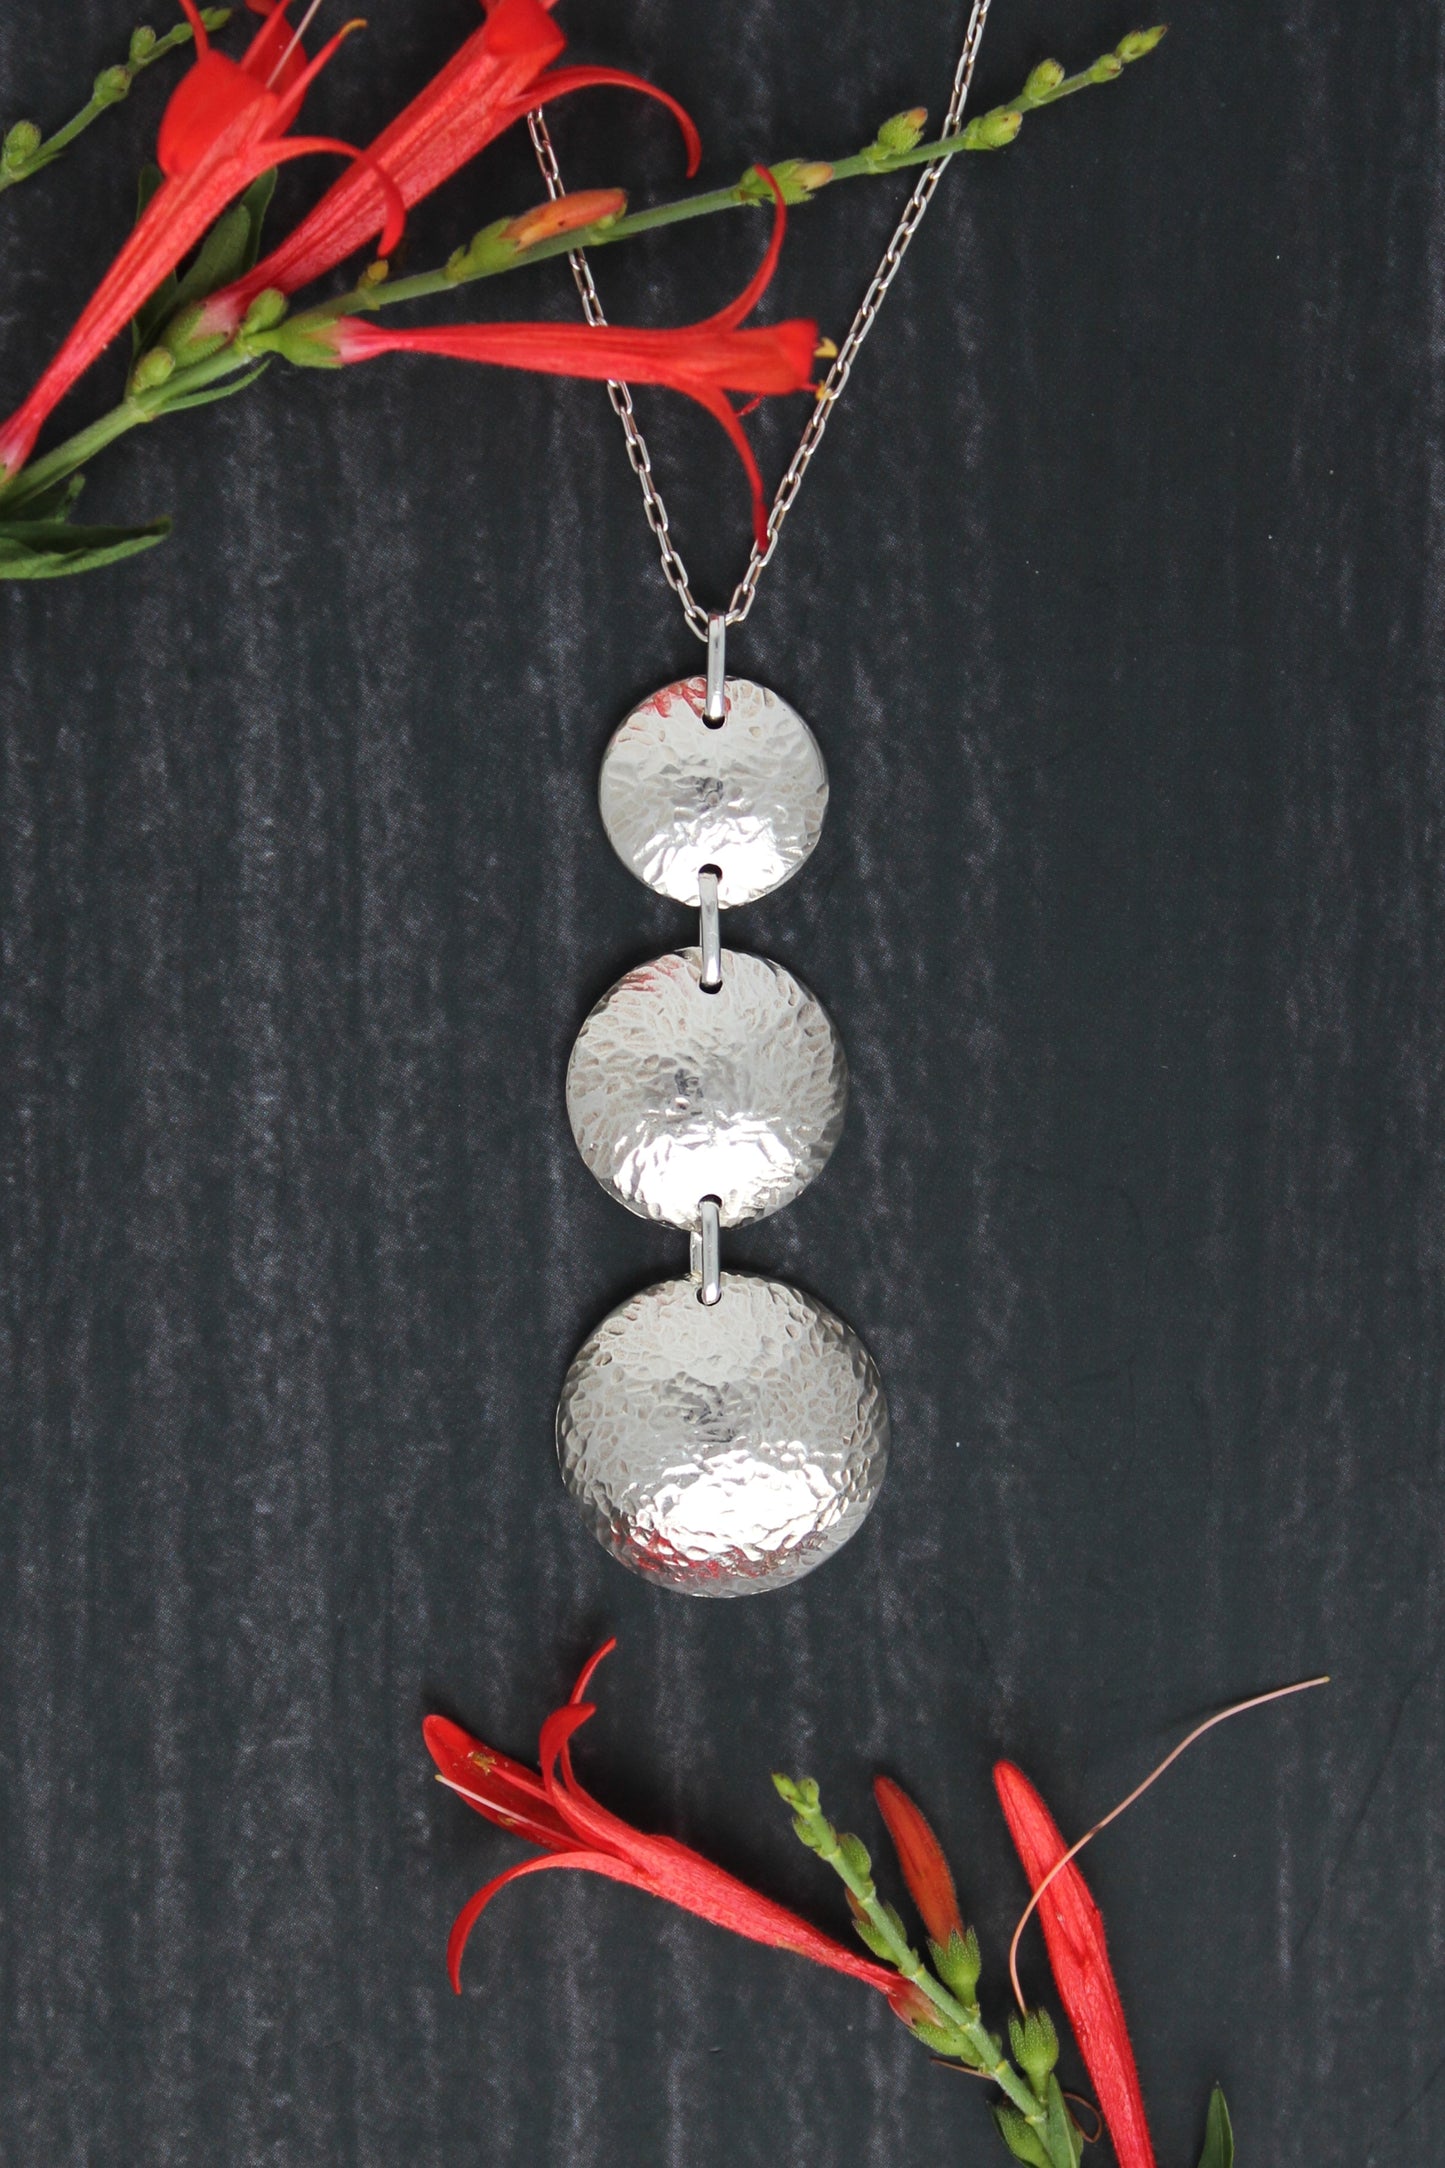 Luna Hammered Circles Sterling Silver Everyday Pendant Necklace. Handmade by Cara Carter Jewelry